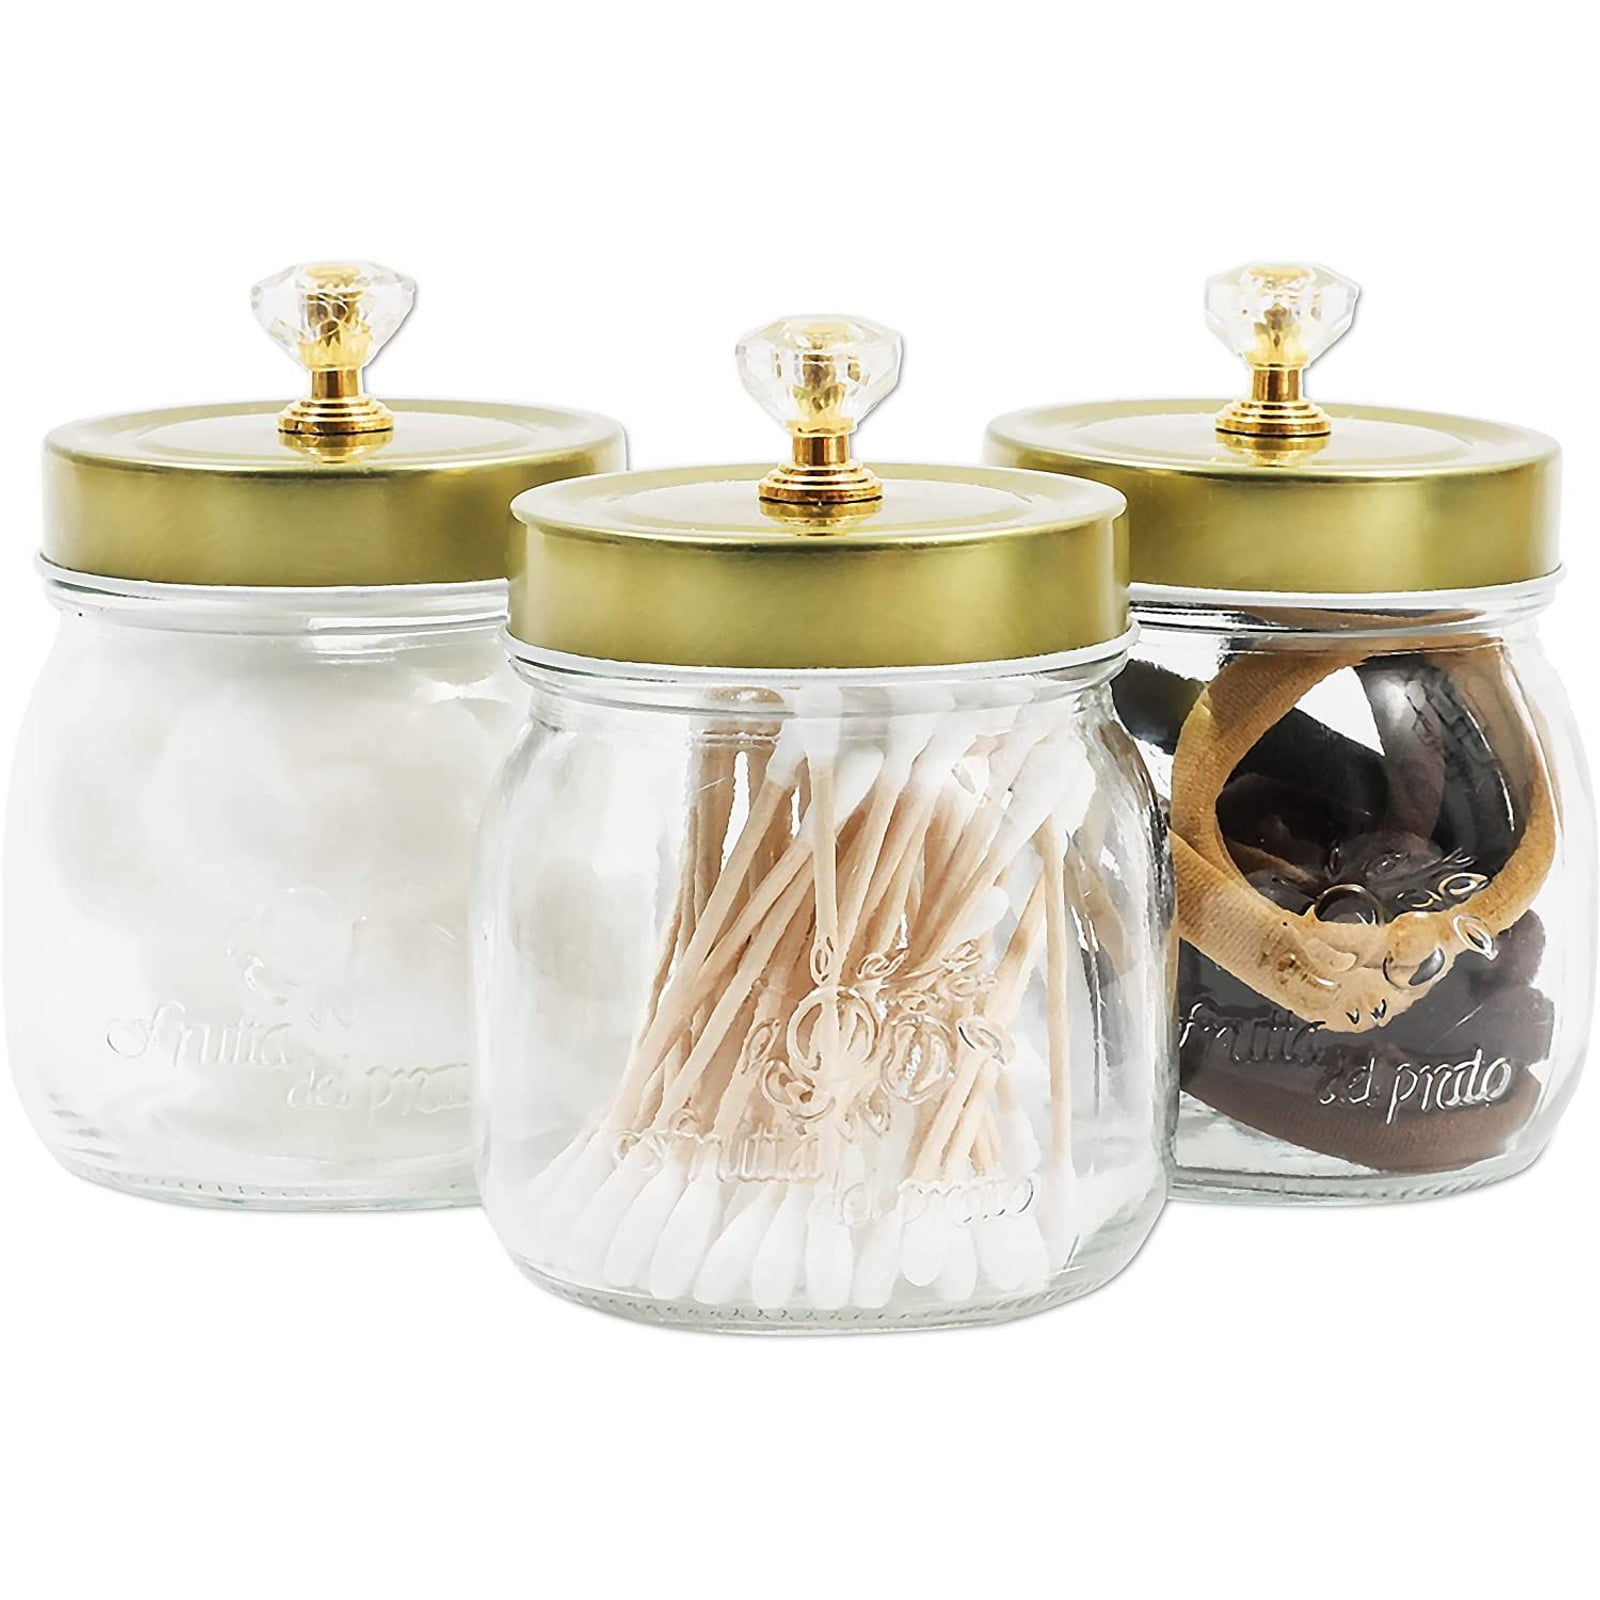 Pottery Barn Inspired Glass Bathroom Canisters for 1/3 the price!!